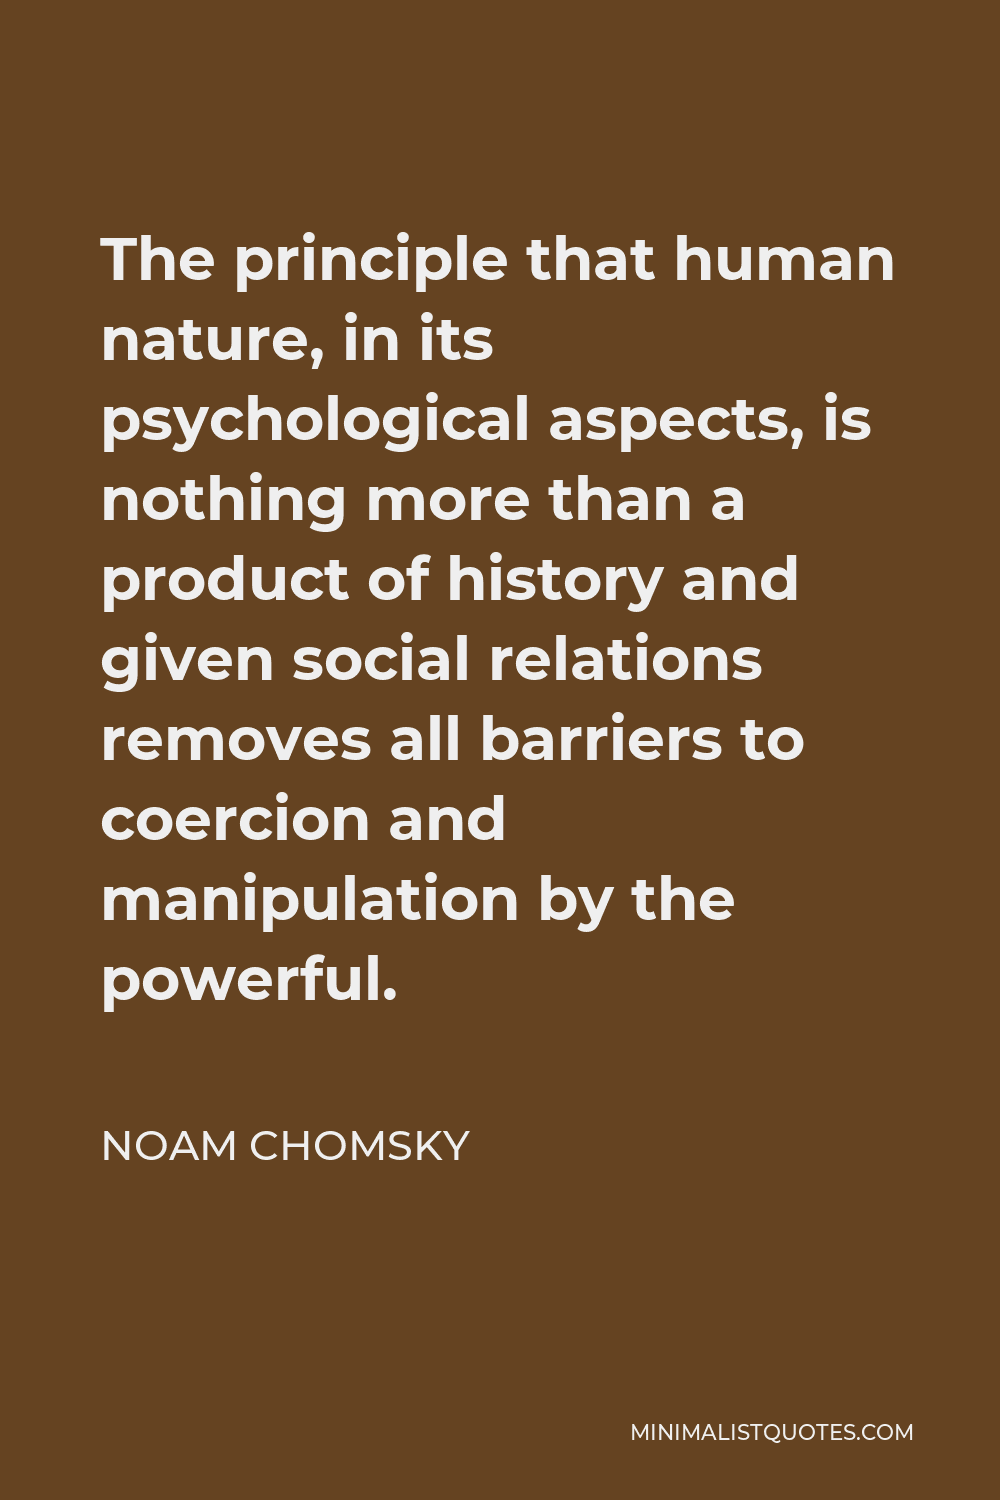 Noam Chomsky Quote - The principle that human nature, in its psychological aspects, is nothing more than a product of history and given social relations removes all barriers to coercion and manipulation by the powerful.